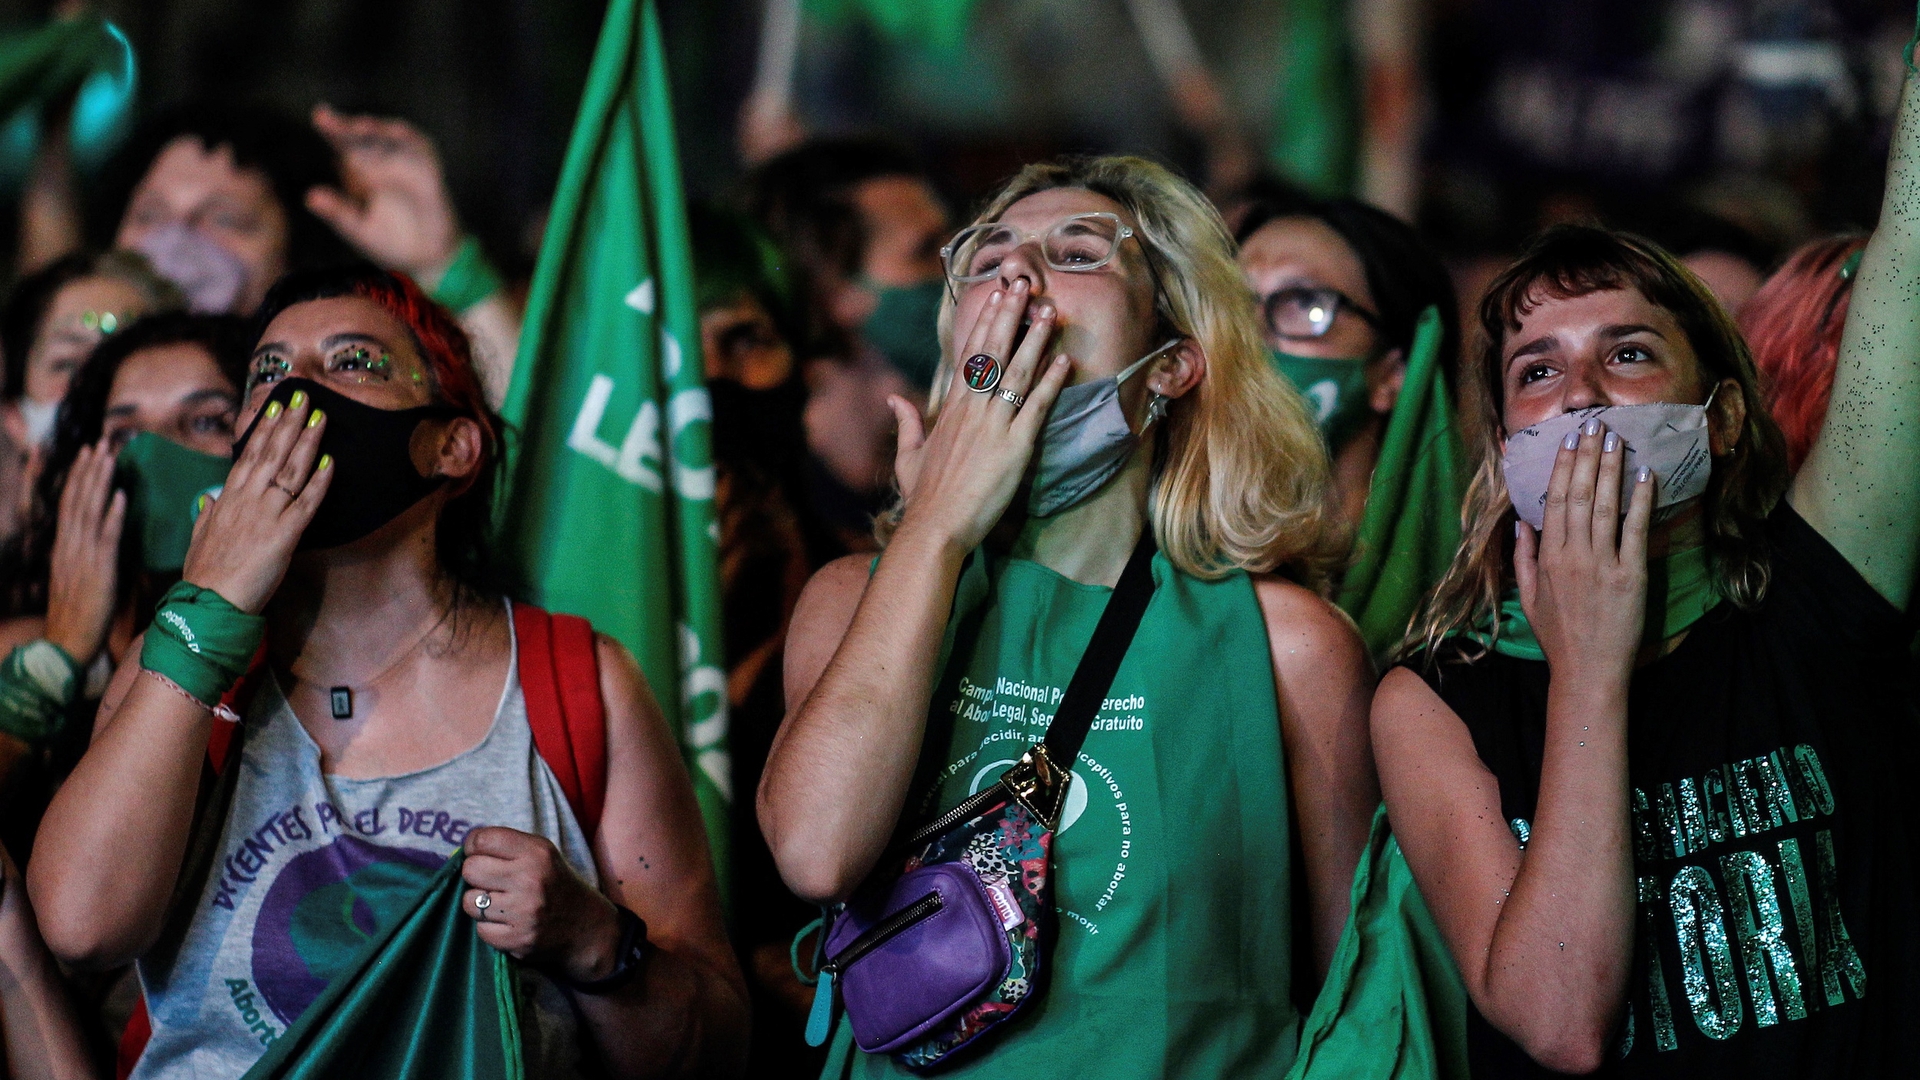 Argentina's streets throb at the fierce vote for legal abortion